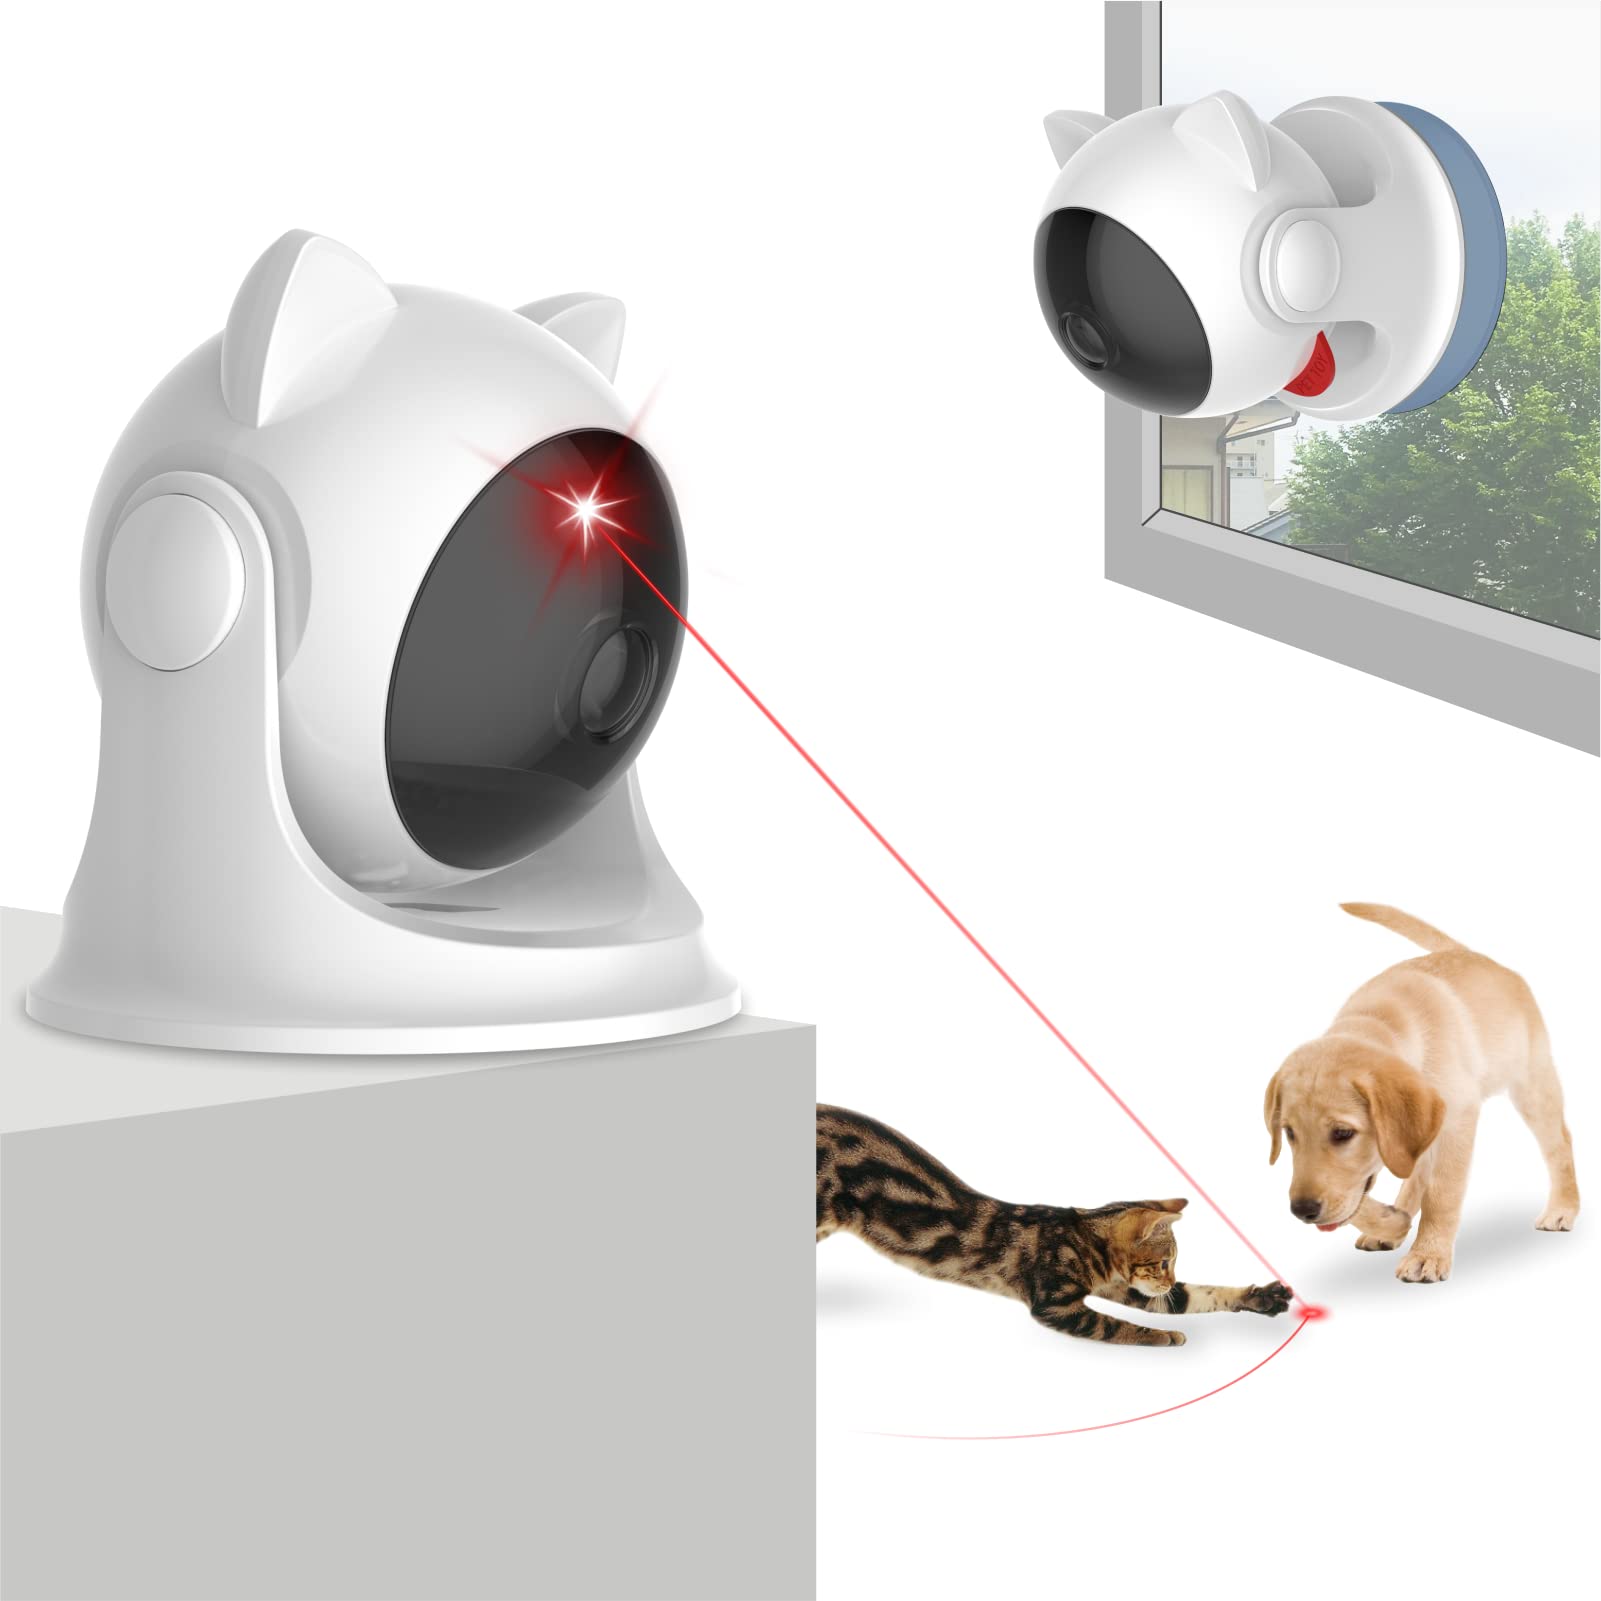 Lidlok Automatic Cat Laser Toy For